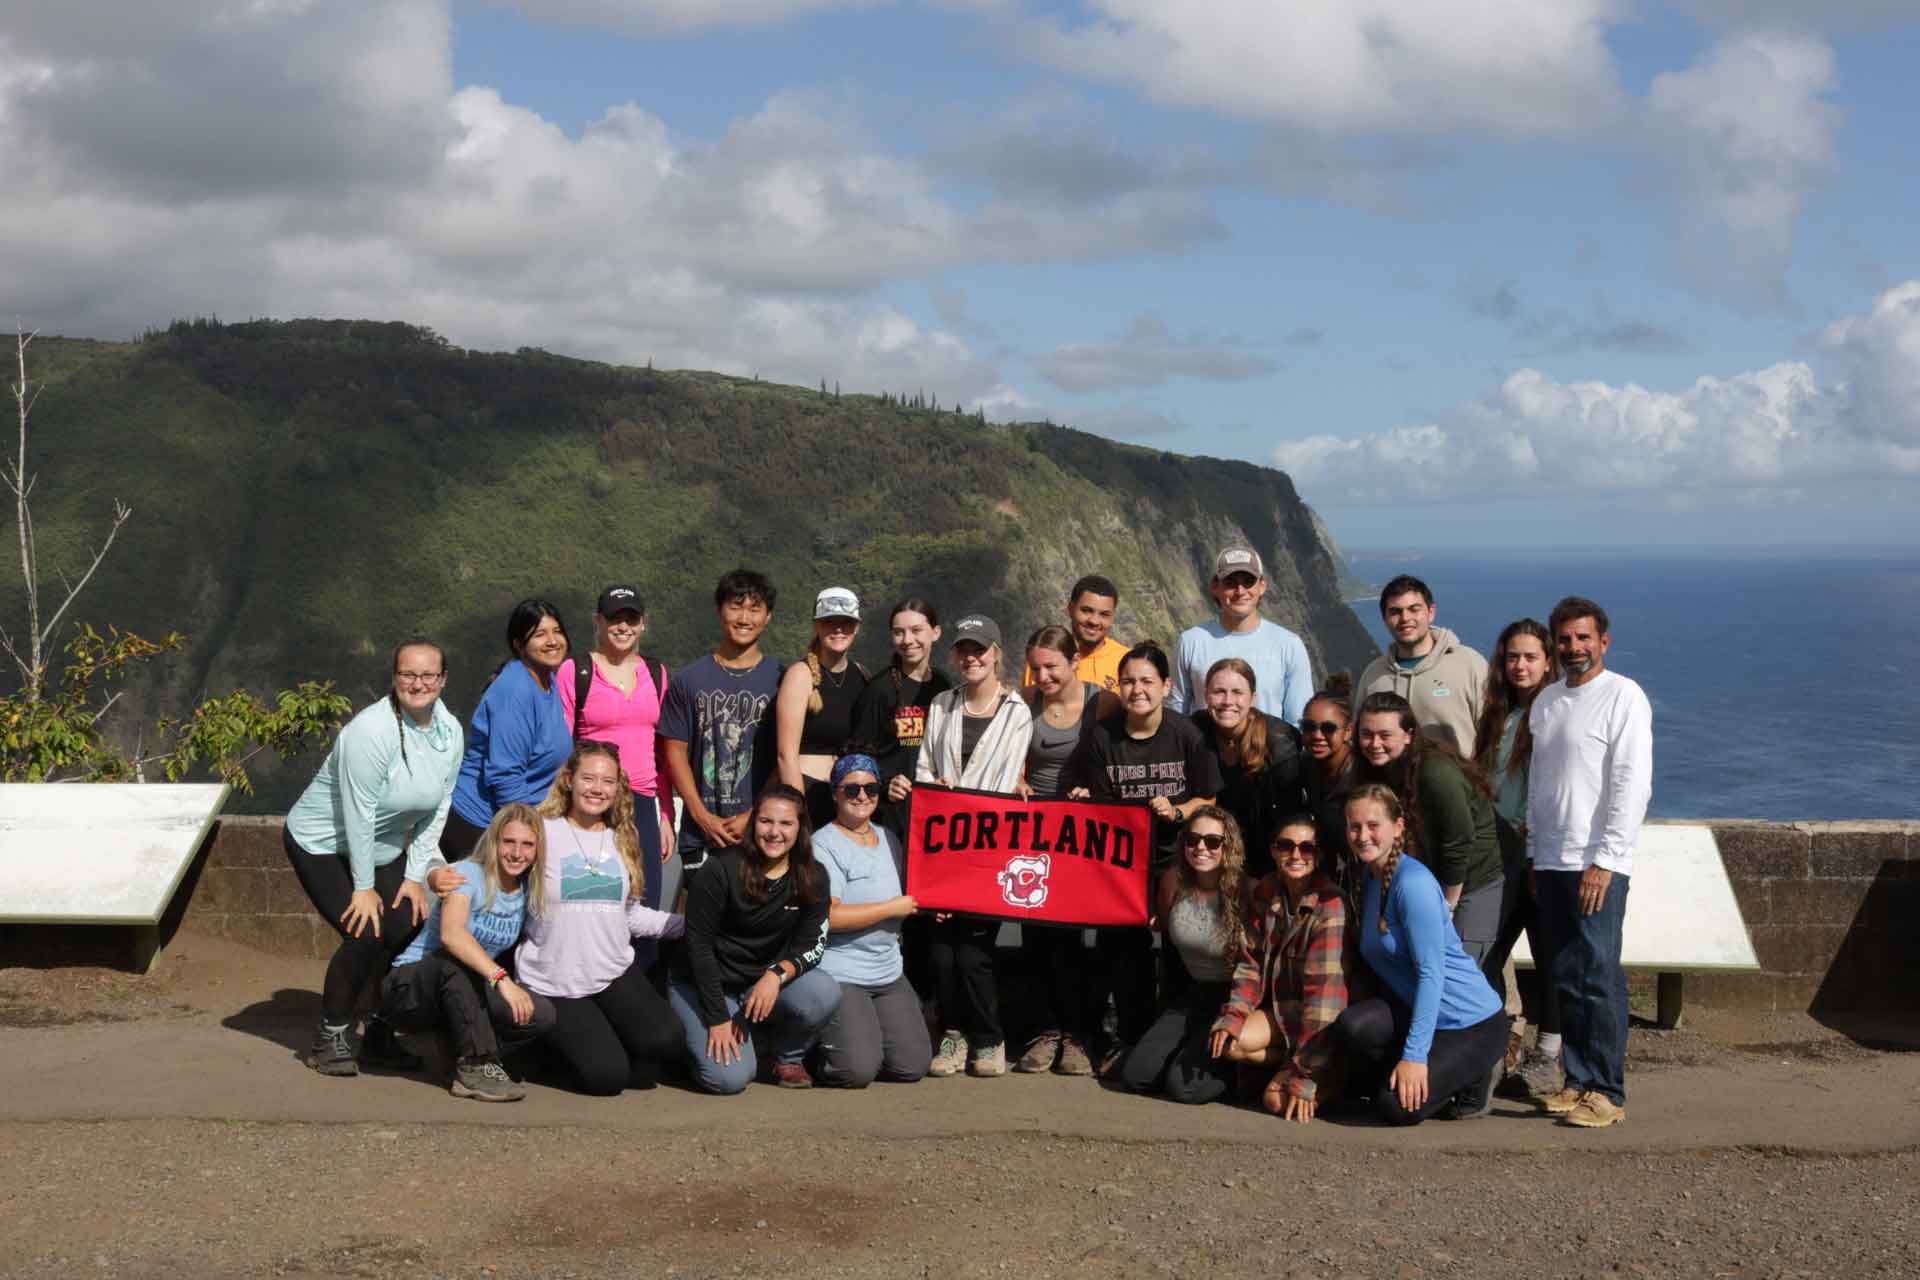 Hawaii ecotourism class pictured with Cortland banner